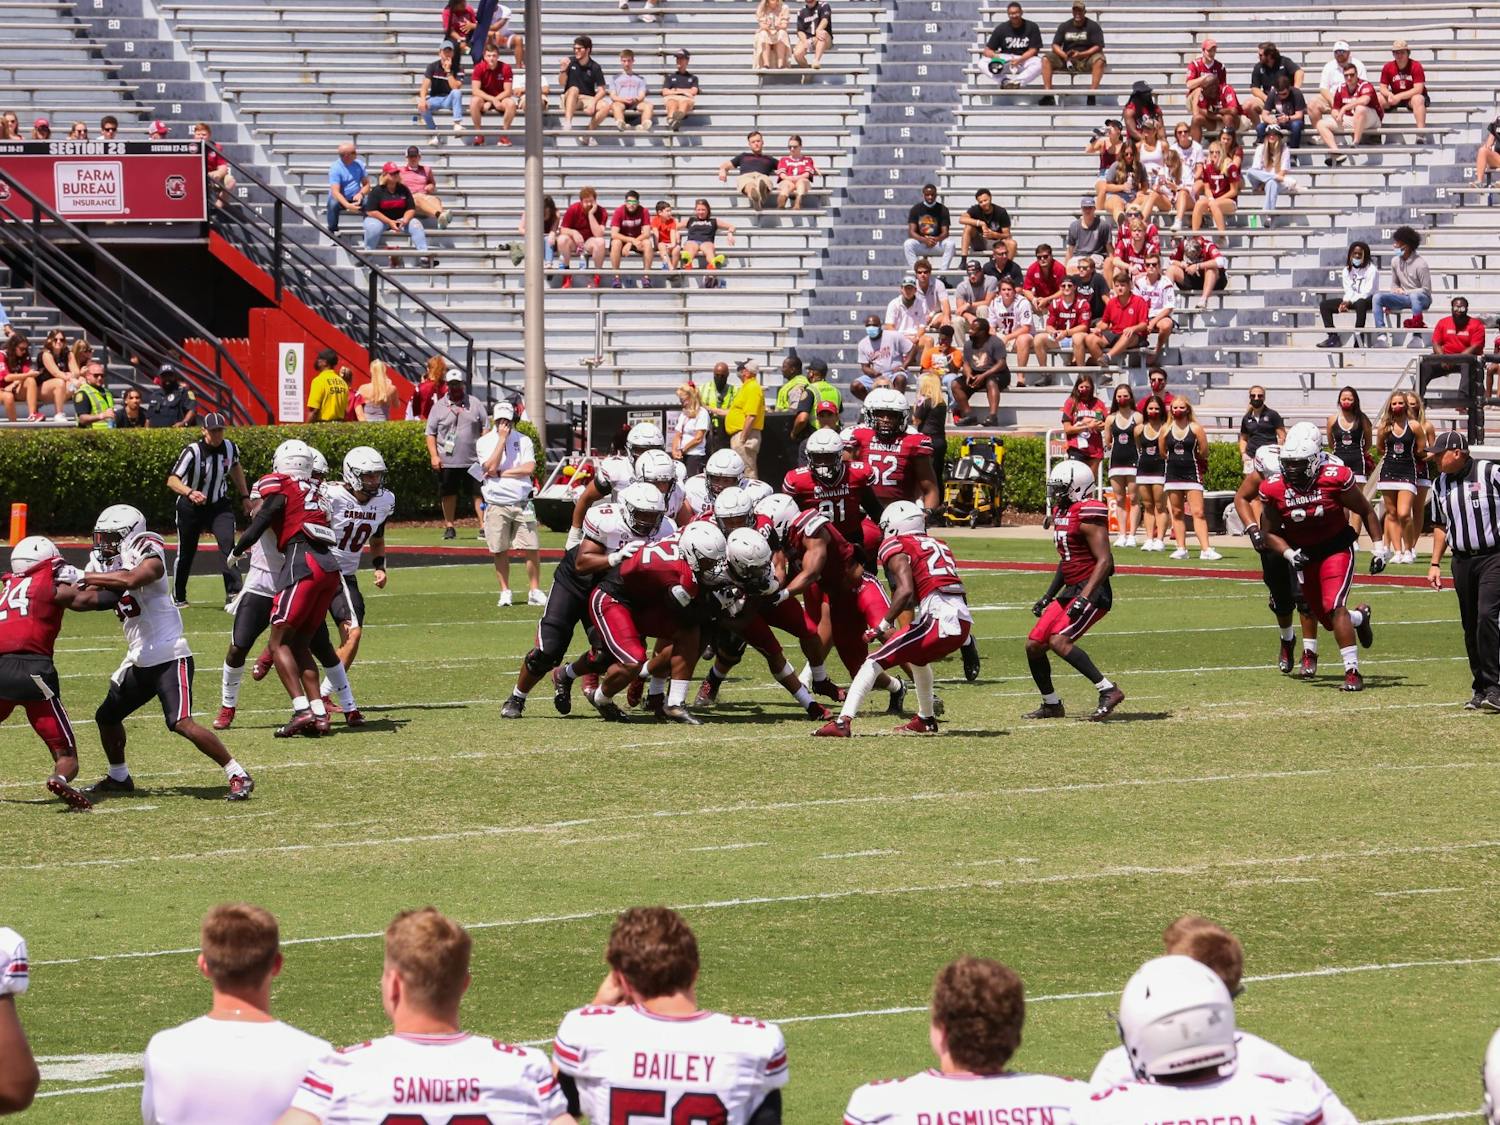 &nbsp;A view from above the playing field showing the USC football team playing against each other in the 2021 Spring Game.&nbsp;